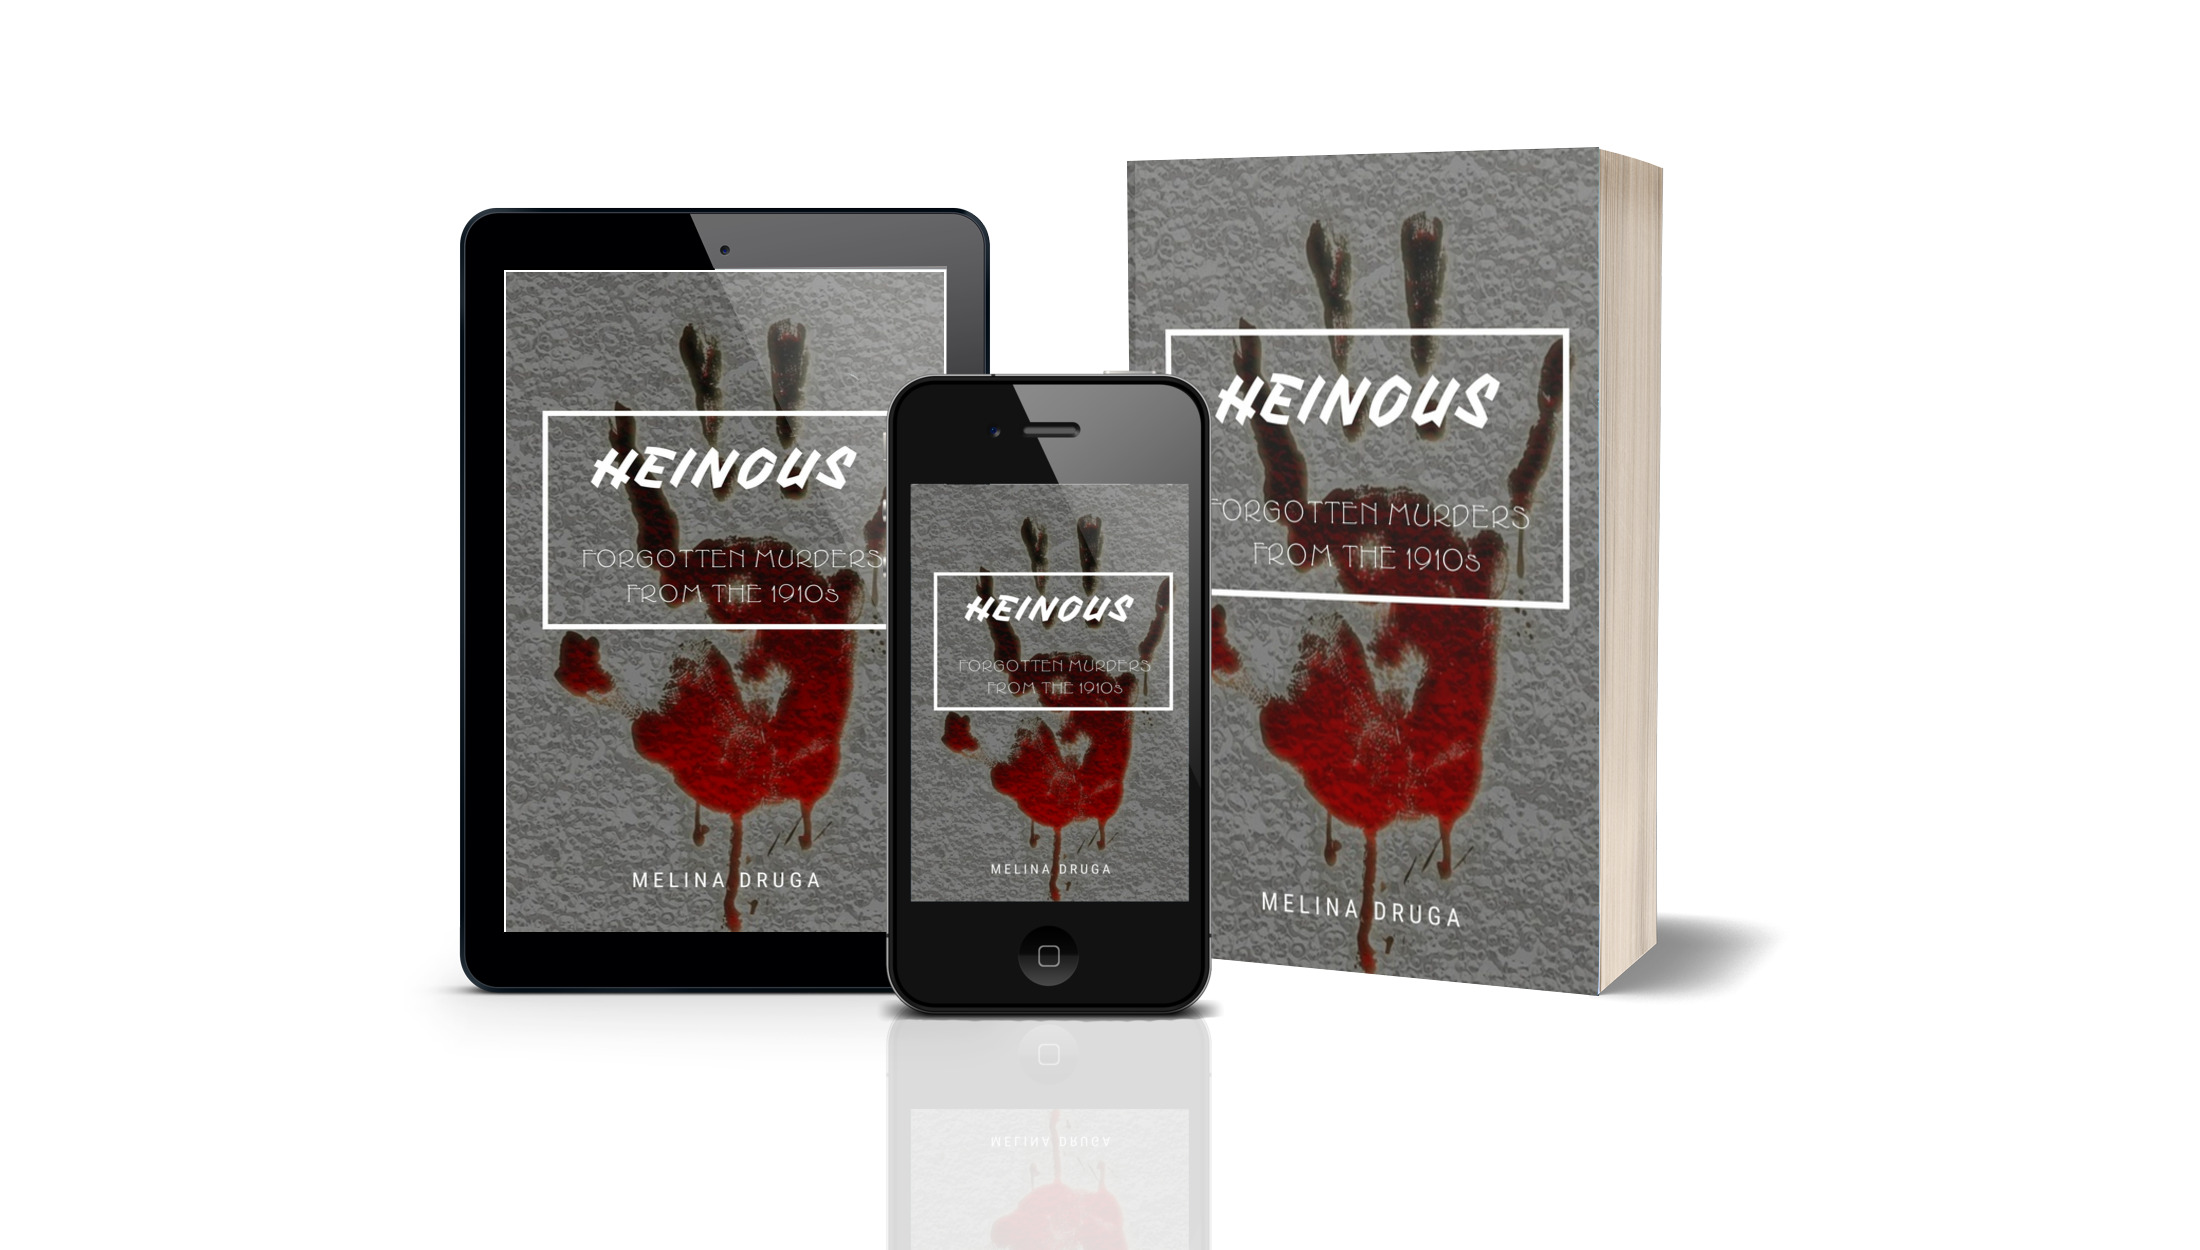 Heinous: Forgotten Murders From the 1910s by Melina Druga